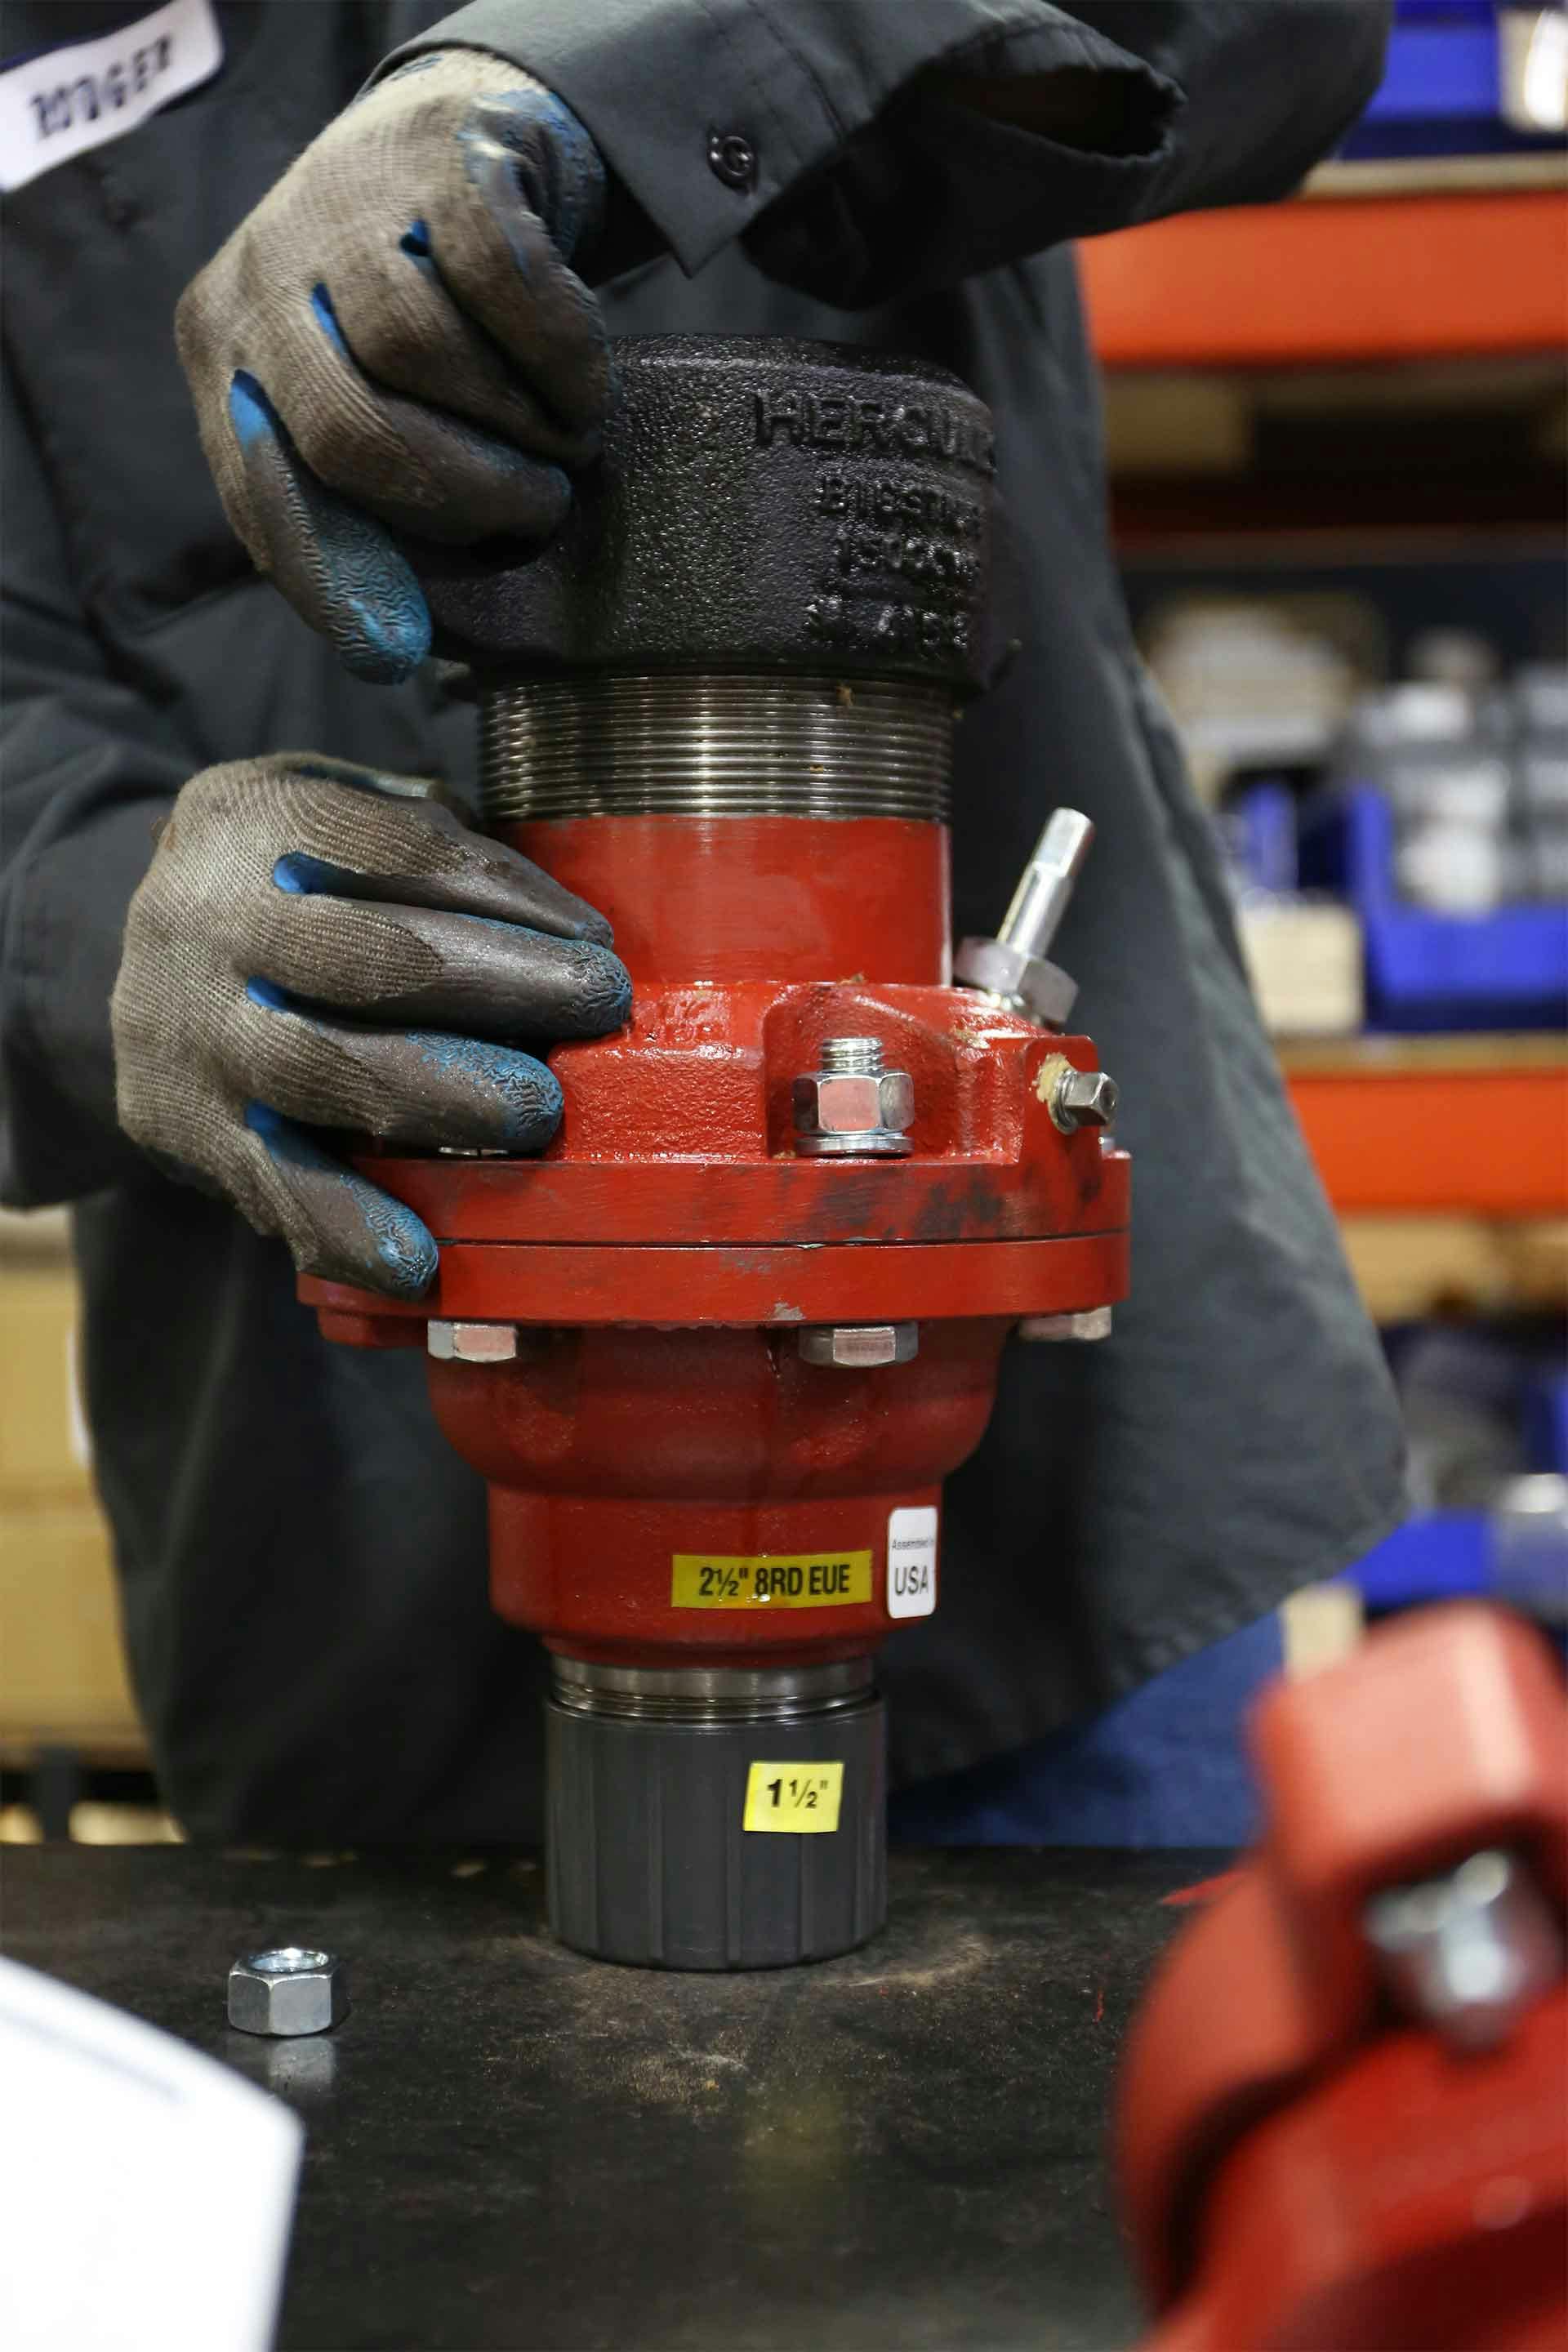 A technician works on a high-temperature stuffing box during manufacturing